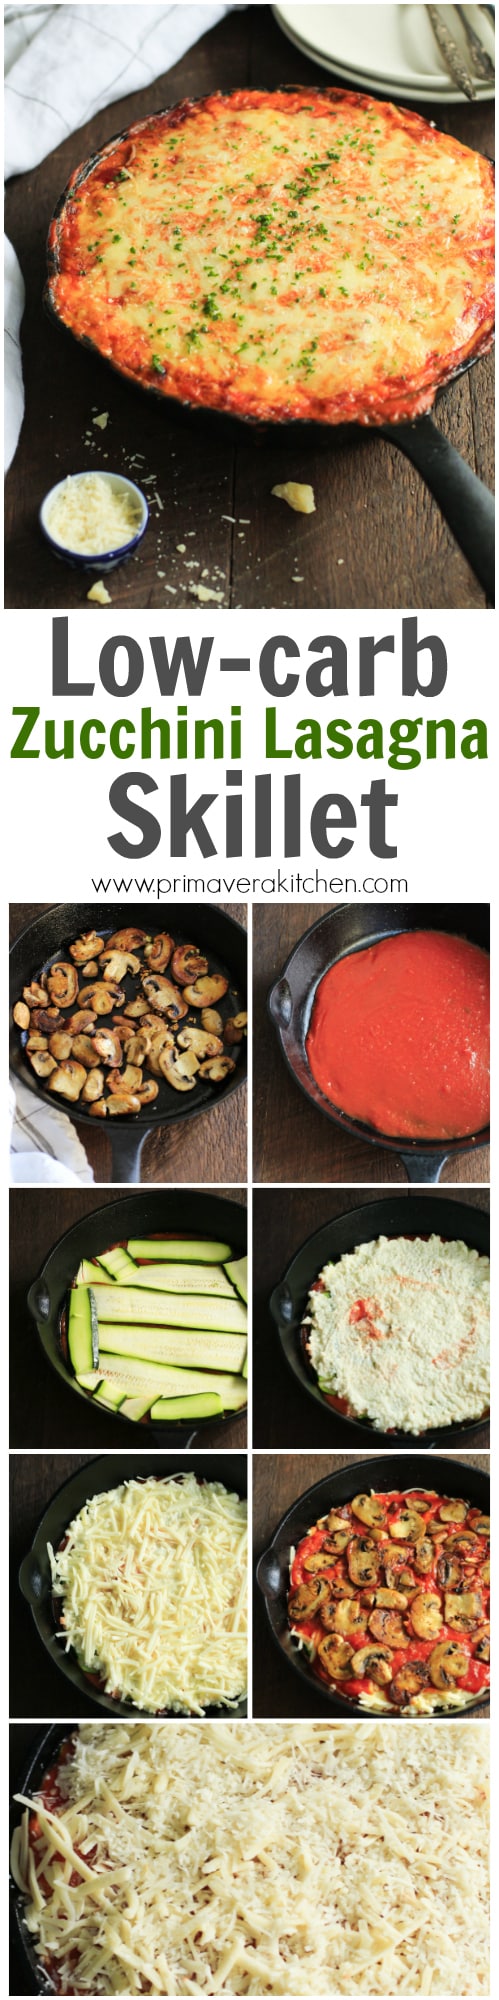 low-carb-zucchini-lasagna-skillet-This cheesy and saucy Low Carb Zucchini Lasagna Skillet is one-pan meal that has a delicious sauté mushroom filling, which brings this gluten-free lasagna to a new level on flavour. It’s also very simple to assemble in a skillet. 